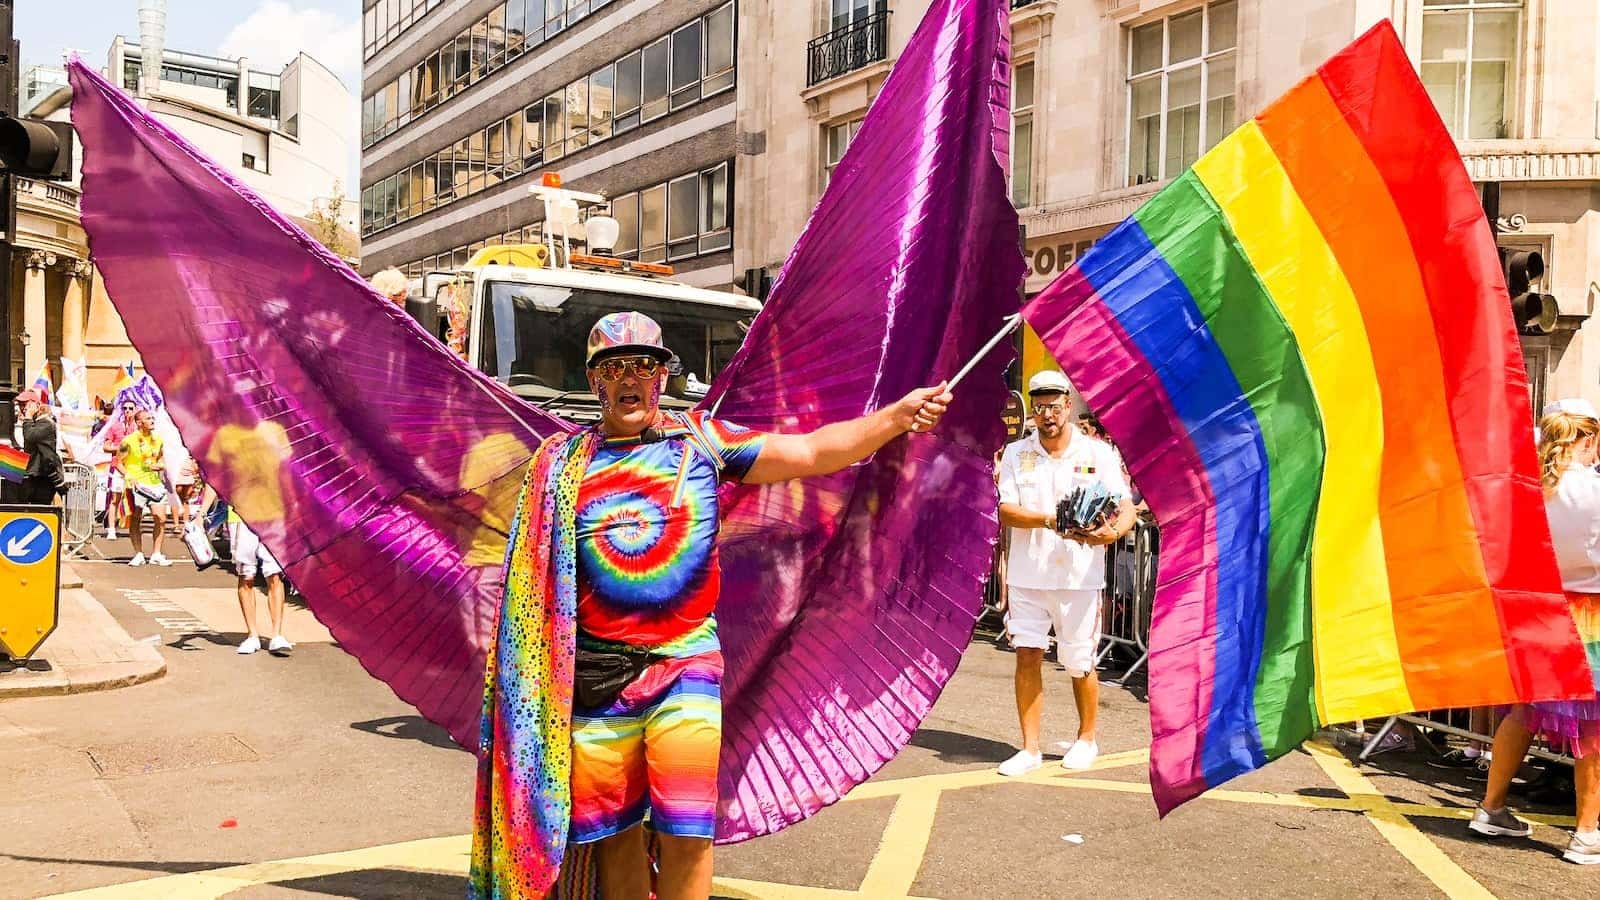 Sherlock Holmes opnåelige Tilintetgøre 10 best Gay Pride outfits to look sexy and fabulous • Nomadic Boys